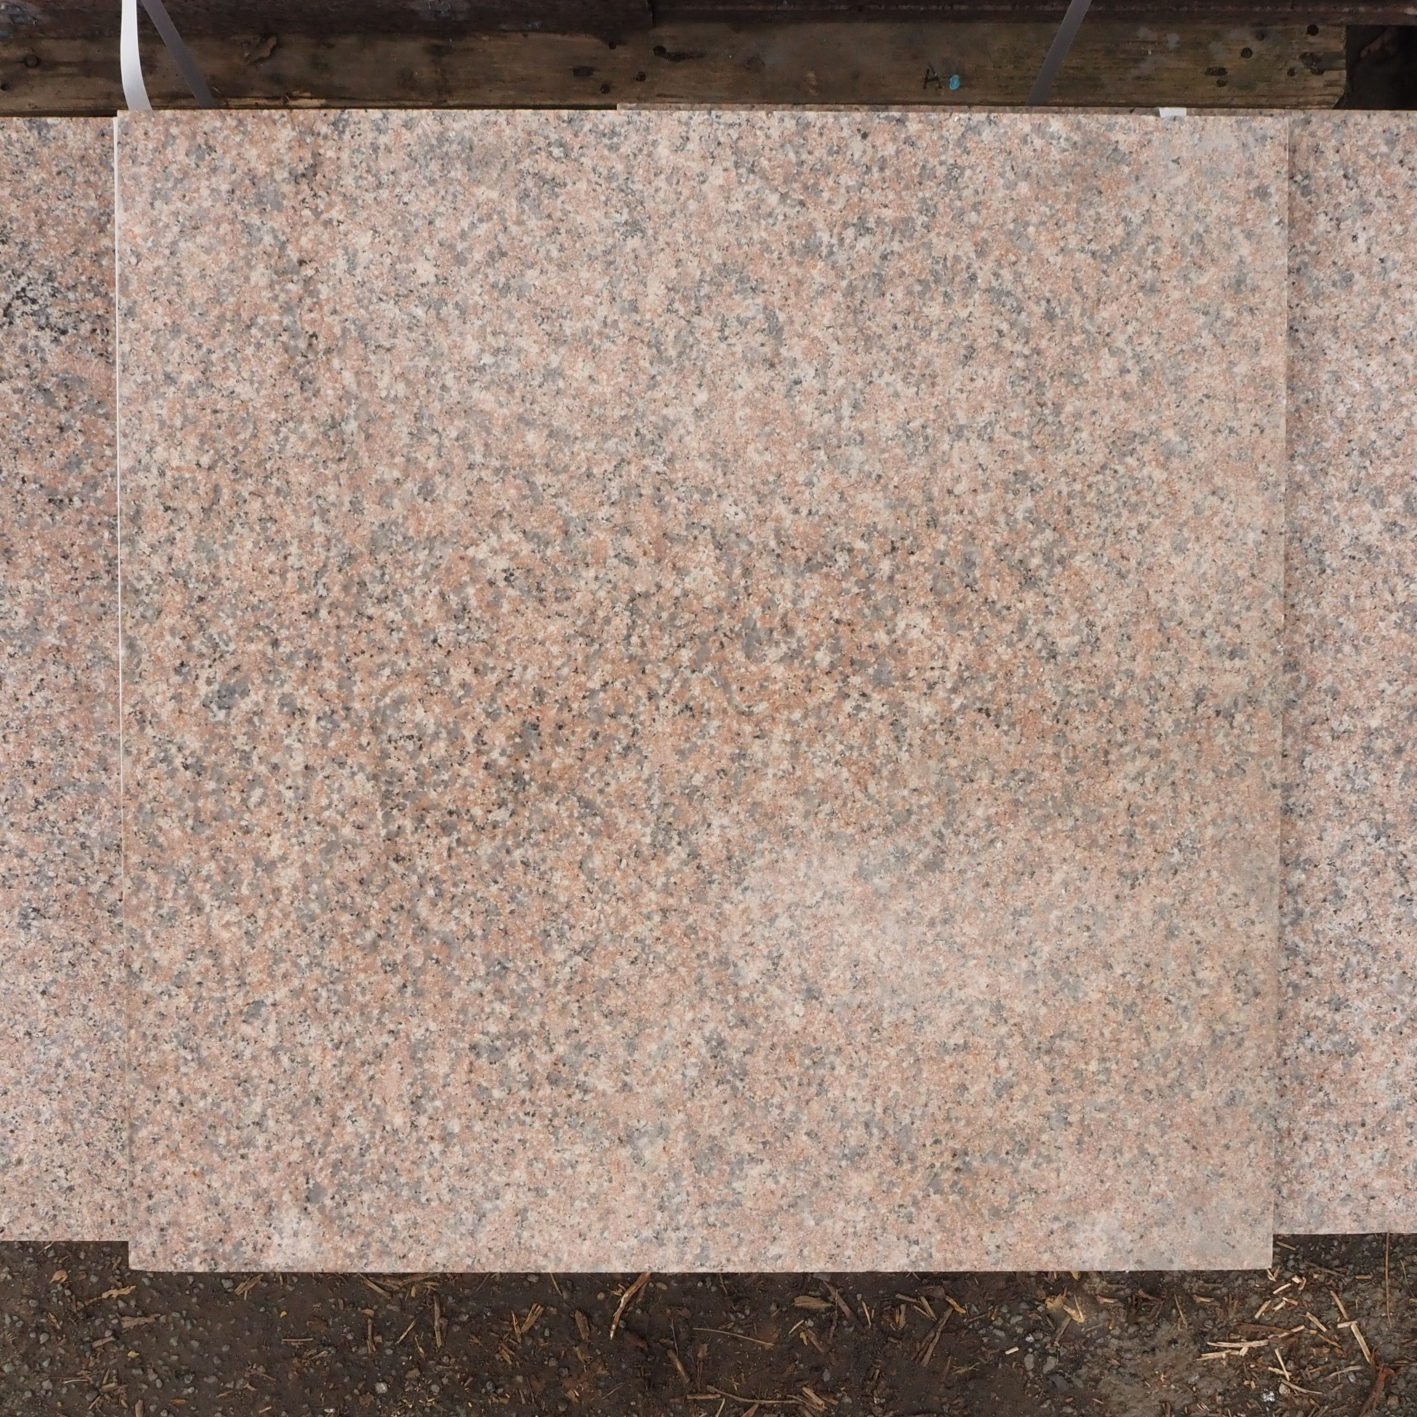 Red granite slabs (from 3,2 to 3,5 cm thick) - Sold per m2